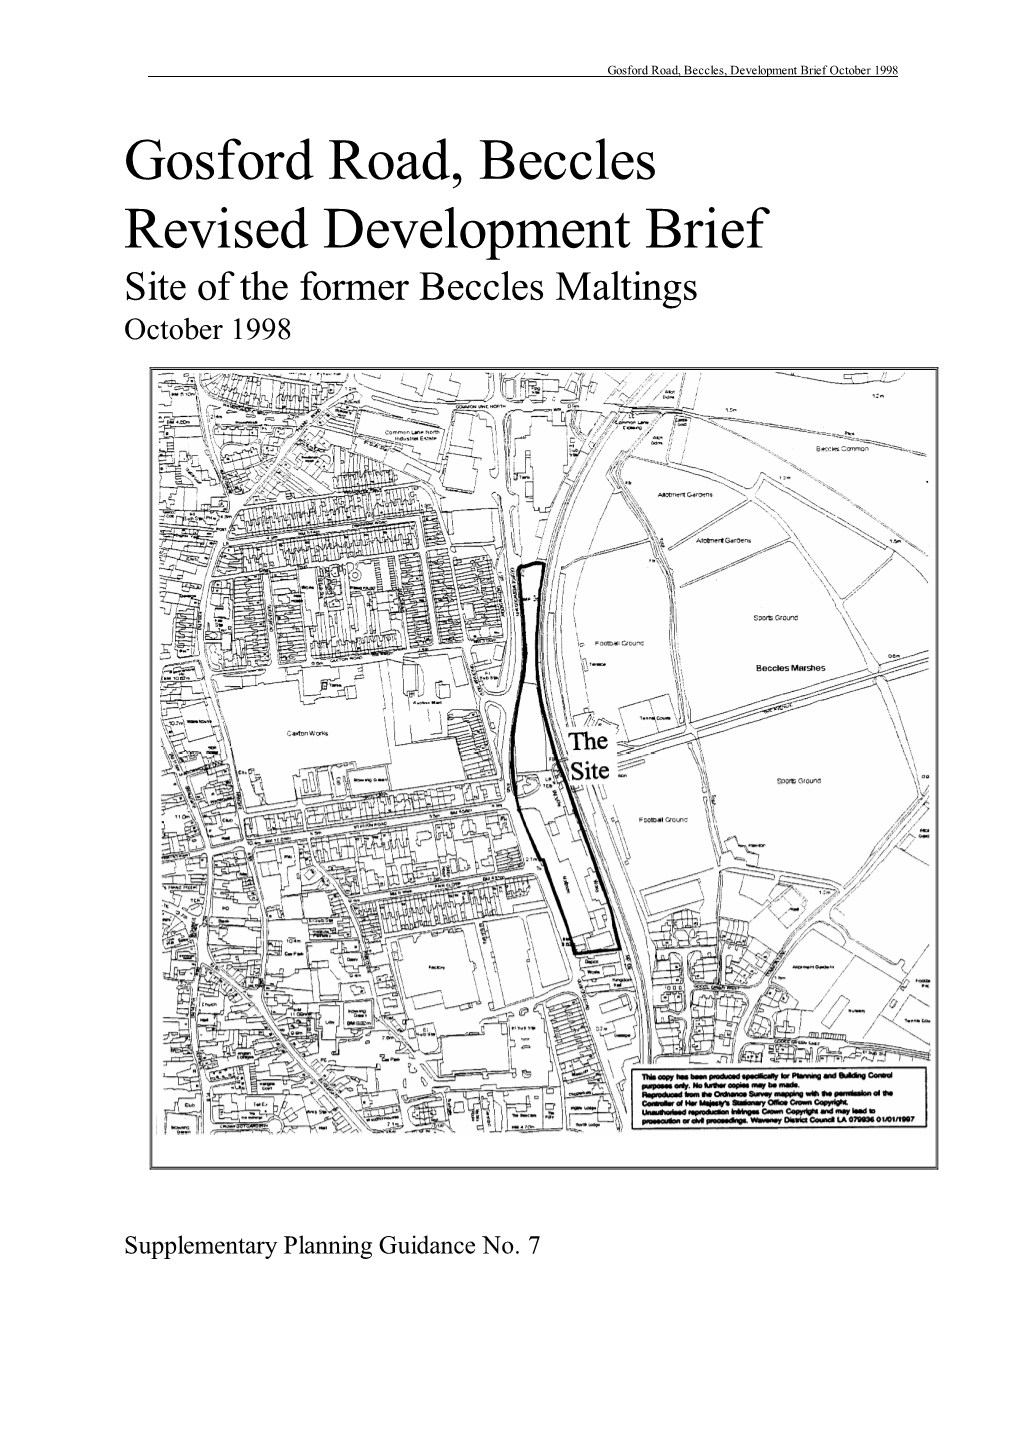 Gosford Road, Beccles Revised Development Brief Site of the Former Beccles Maltings October 1998